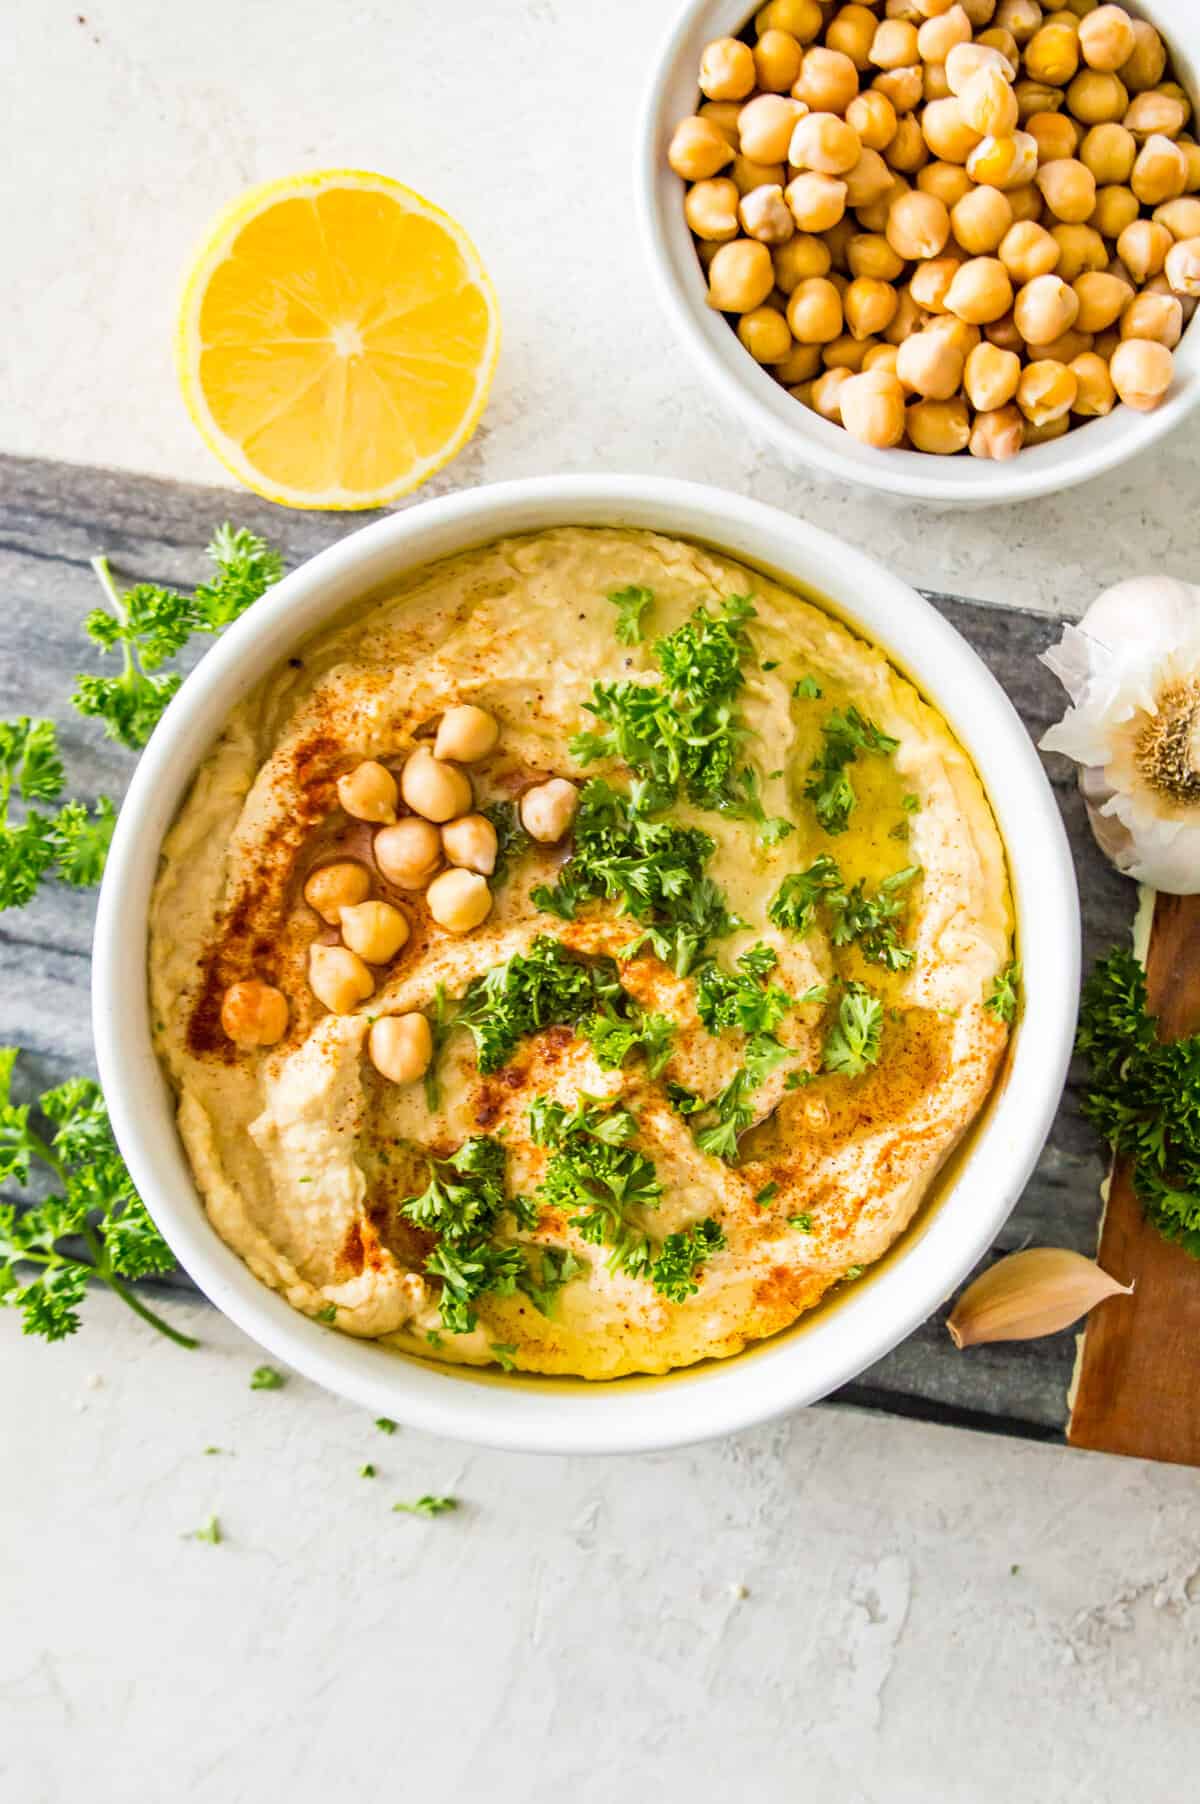 A bowl filled with a gluten free hummus that is topped with fresh, chopped parsley and chickpeas and the bowl has a lemon wedge and garlic cloves beside it.